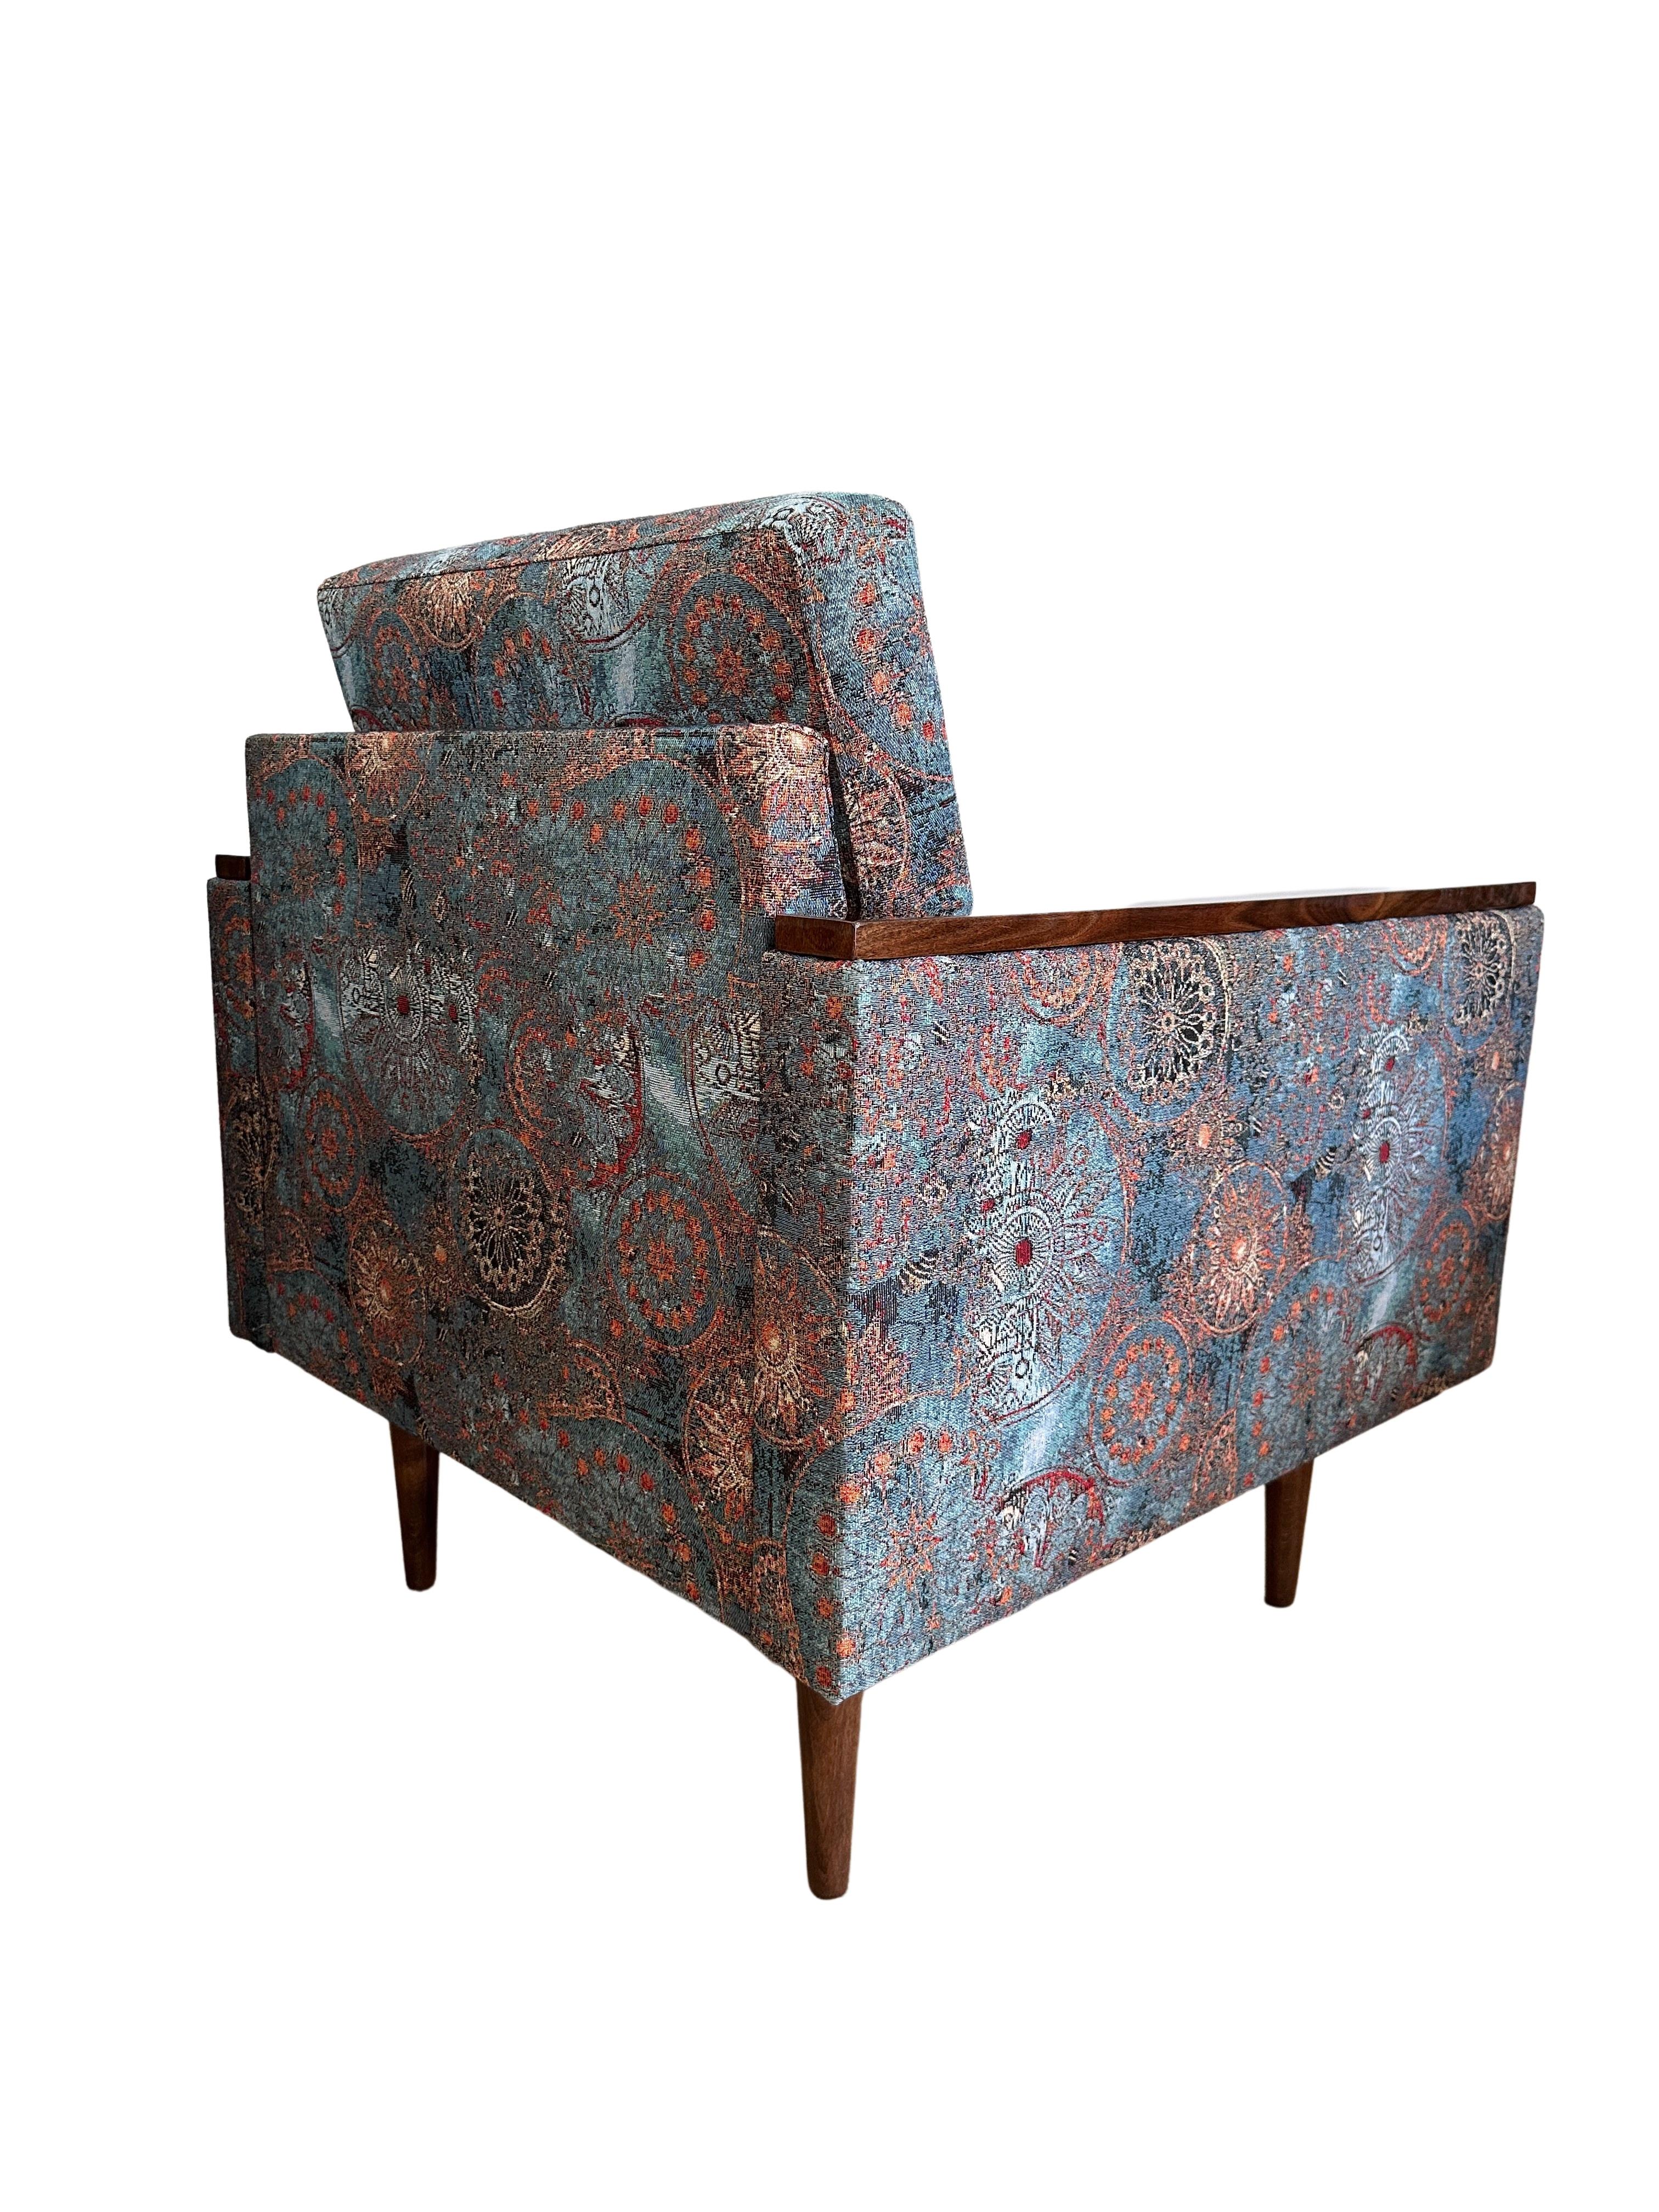 Midcentury Geometric Armchair with Ethnic Pattern, Europe, 1970s For Sale 3